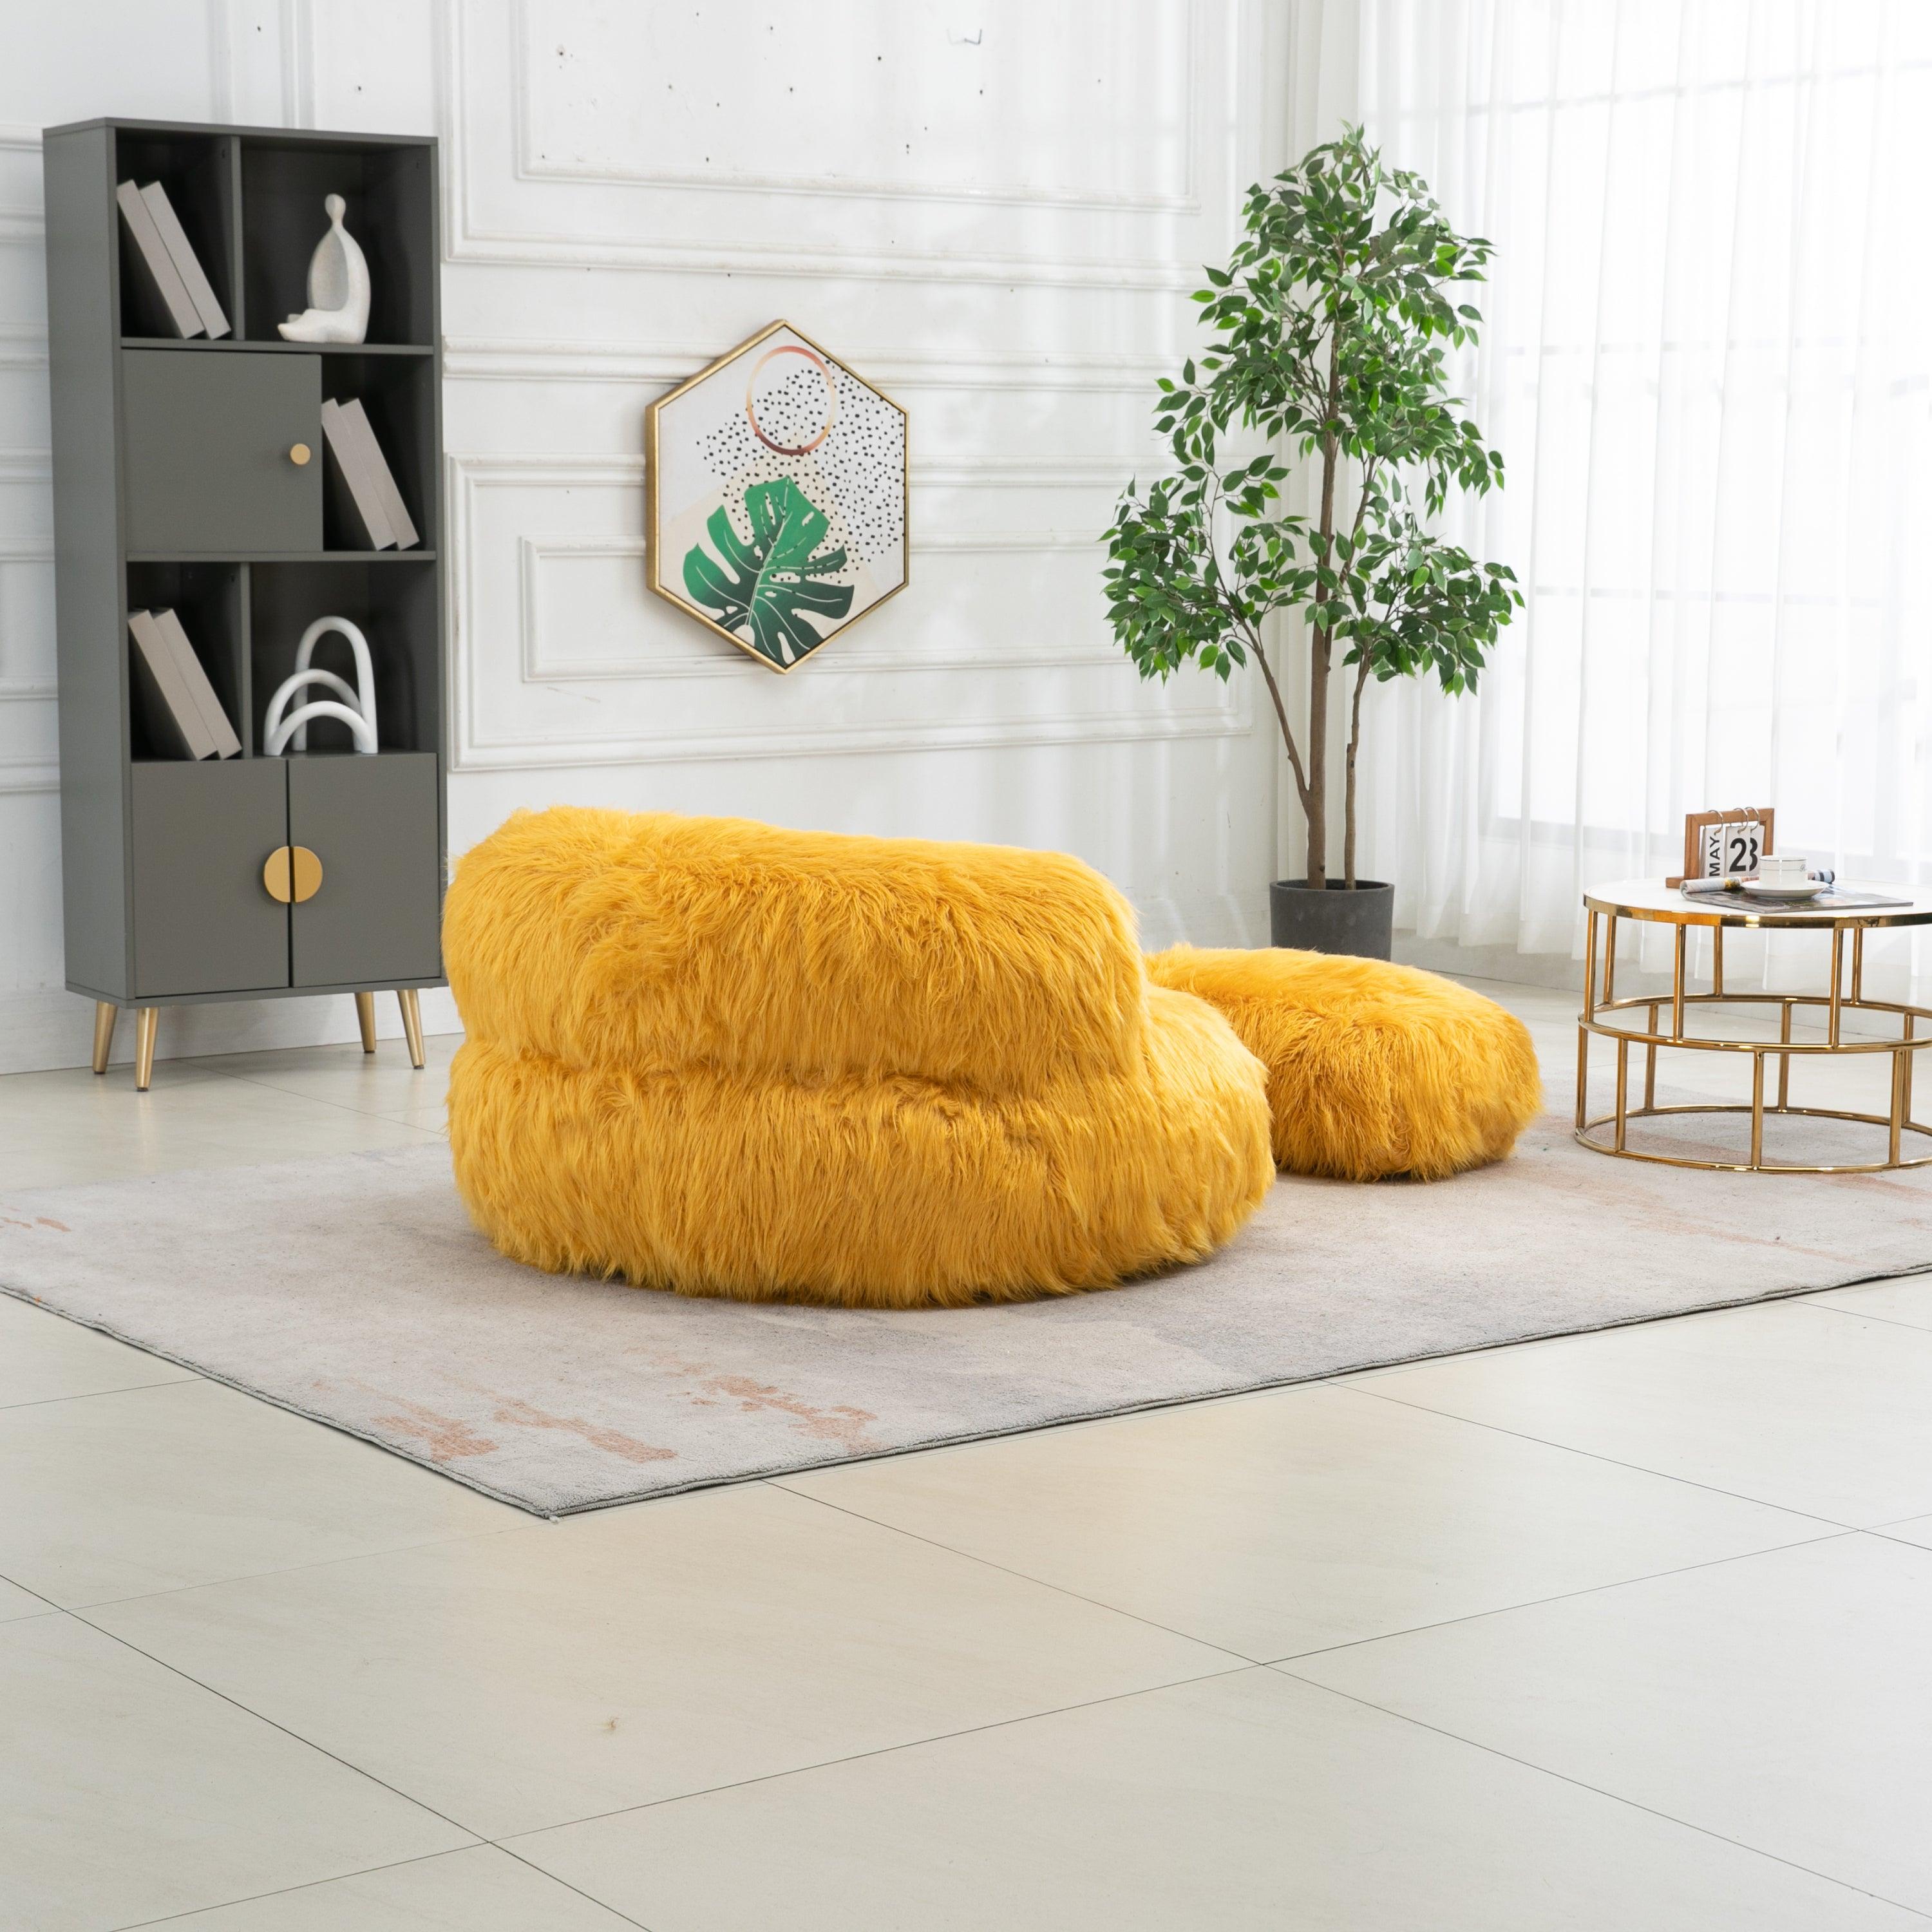 Gramanda 2-In-1 Bean Bag Chair Faux Fur Lazy Sofa & Ottoman Footstool For Adults And Kids - Yellow